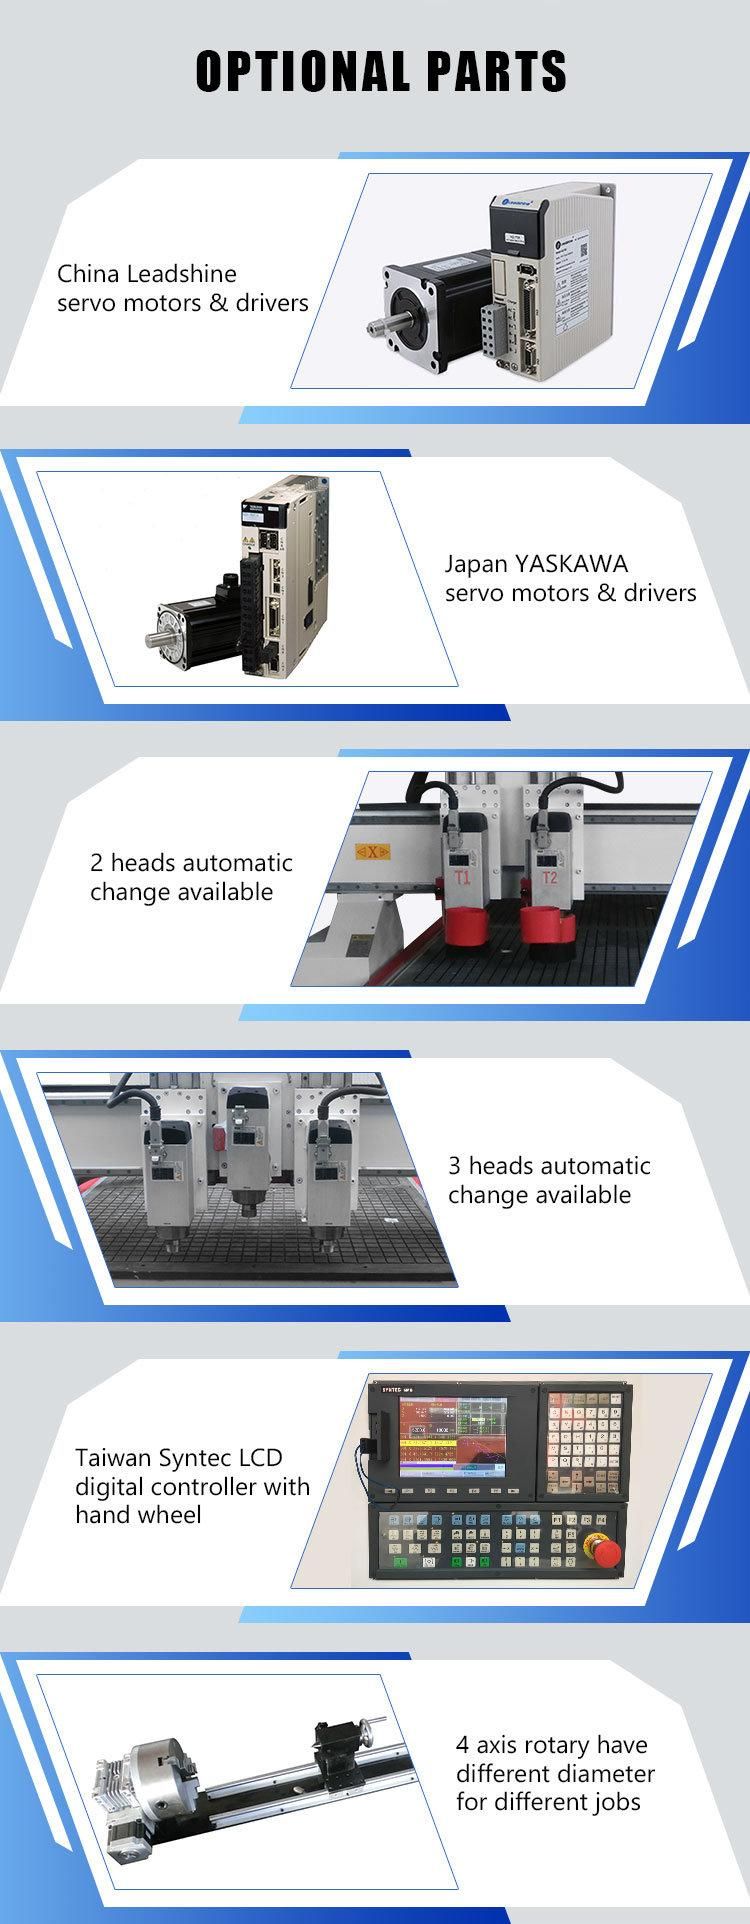 Senke CNC Wood and Metal Material Engraving and Cutting Machine